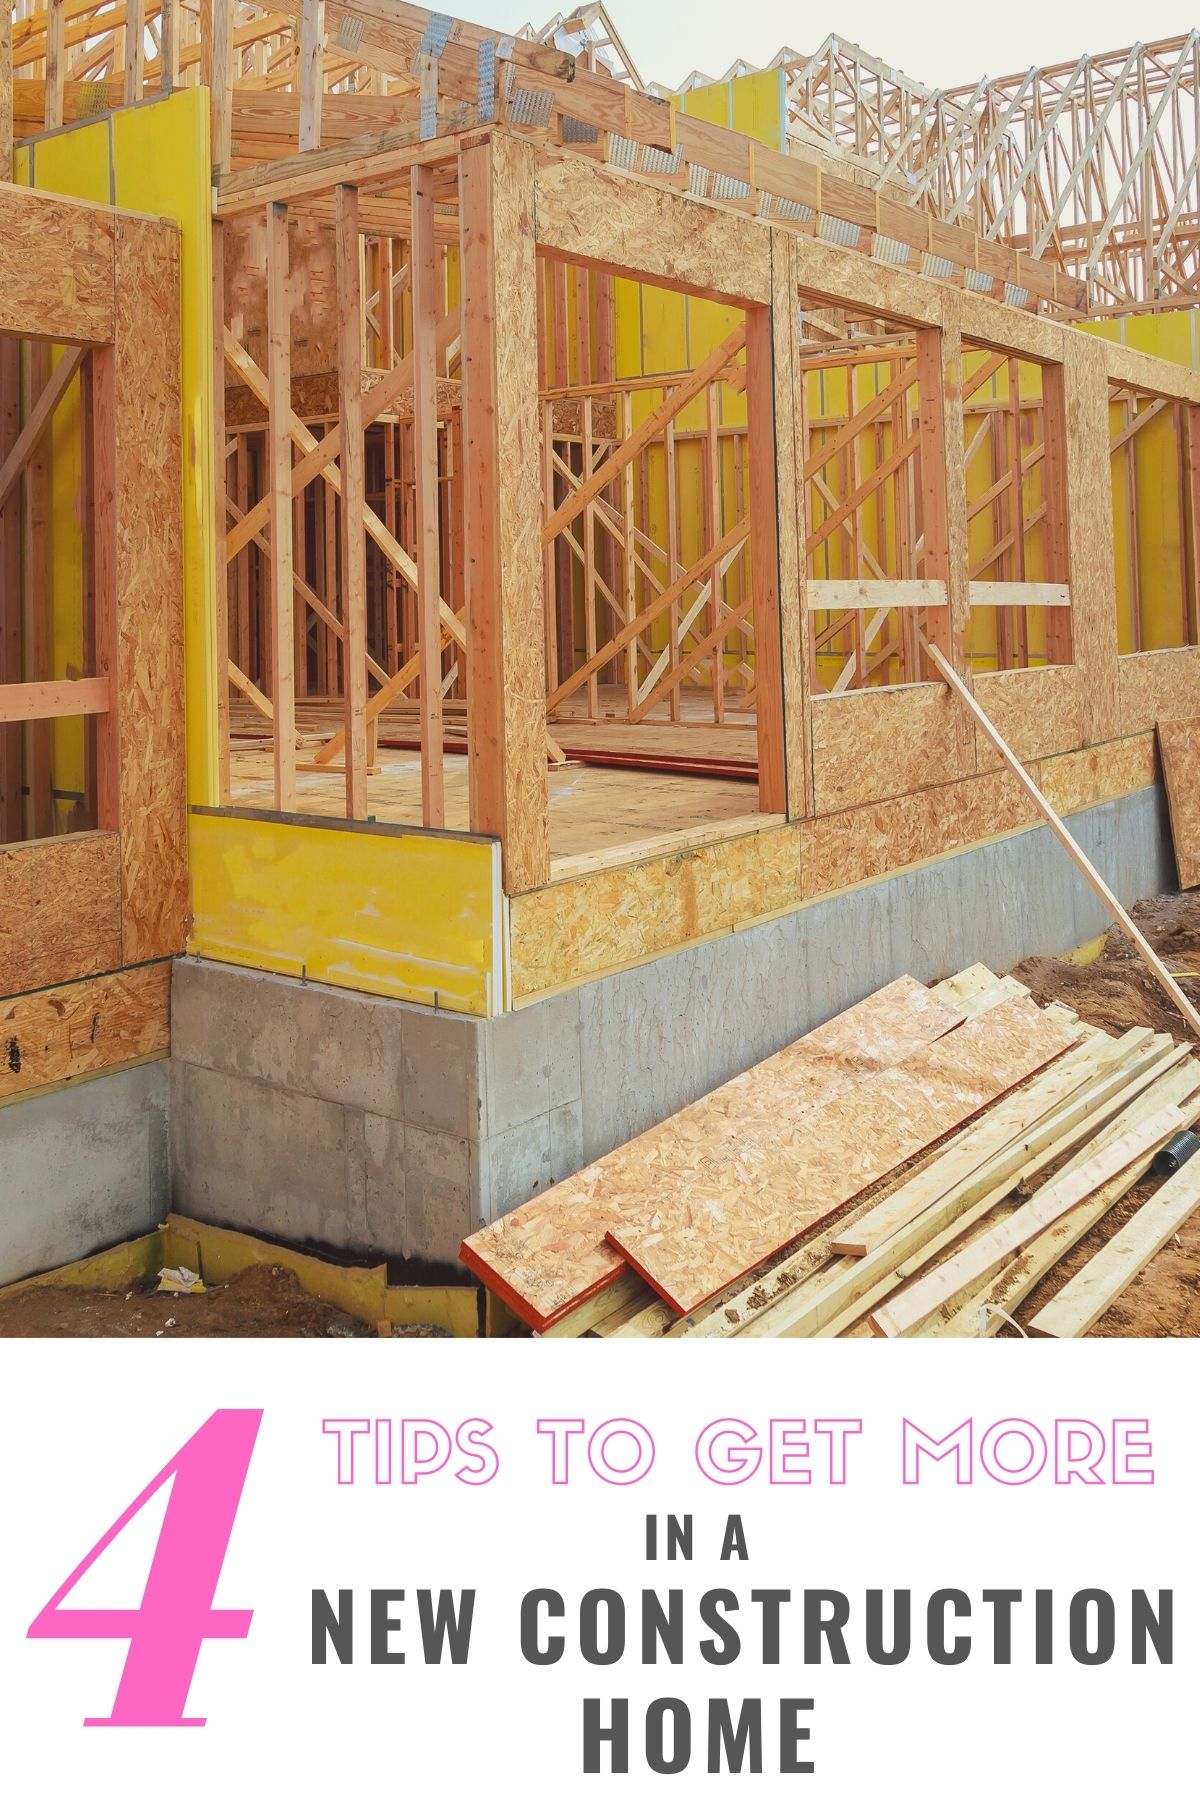 4 Tips to Get More in a New Construction Home